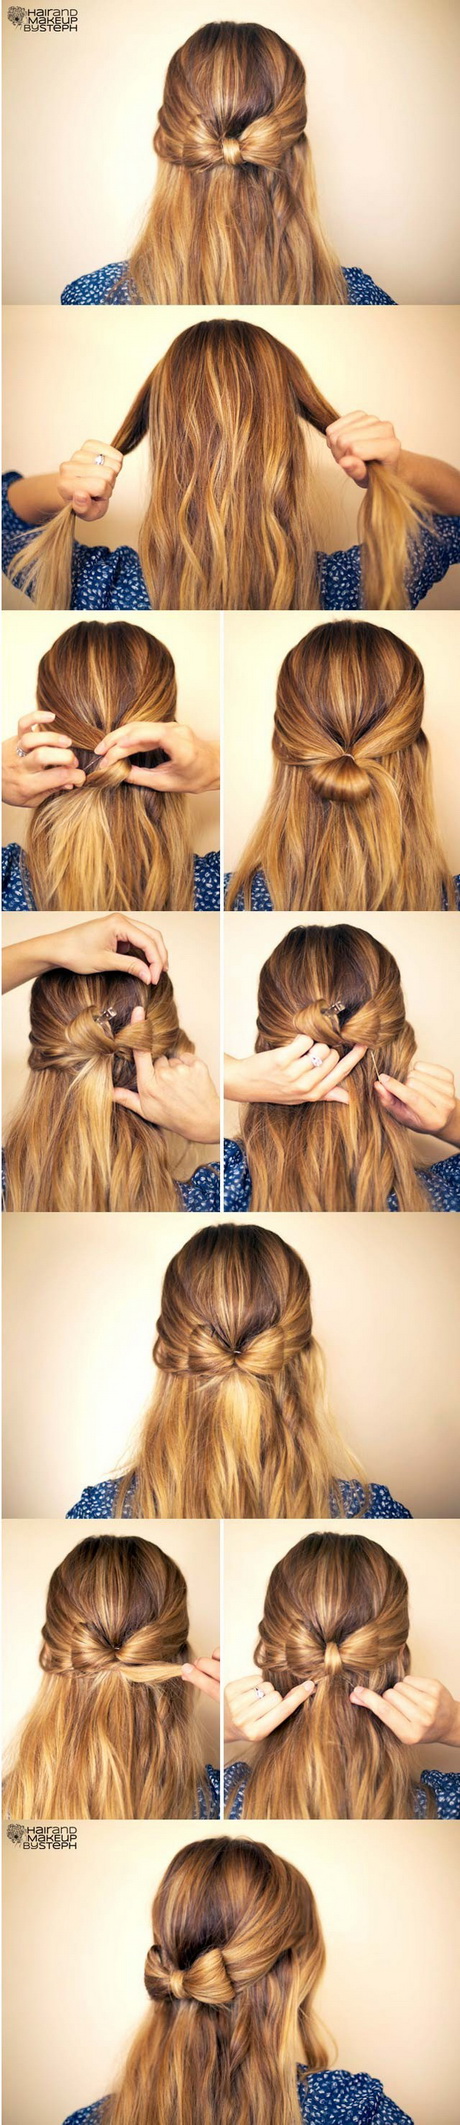 Easy hairstyle for long hair easy-hairstyle-for-long-hair-46-10